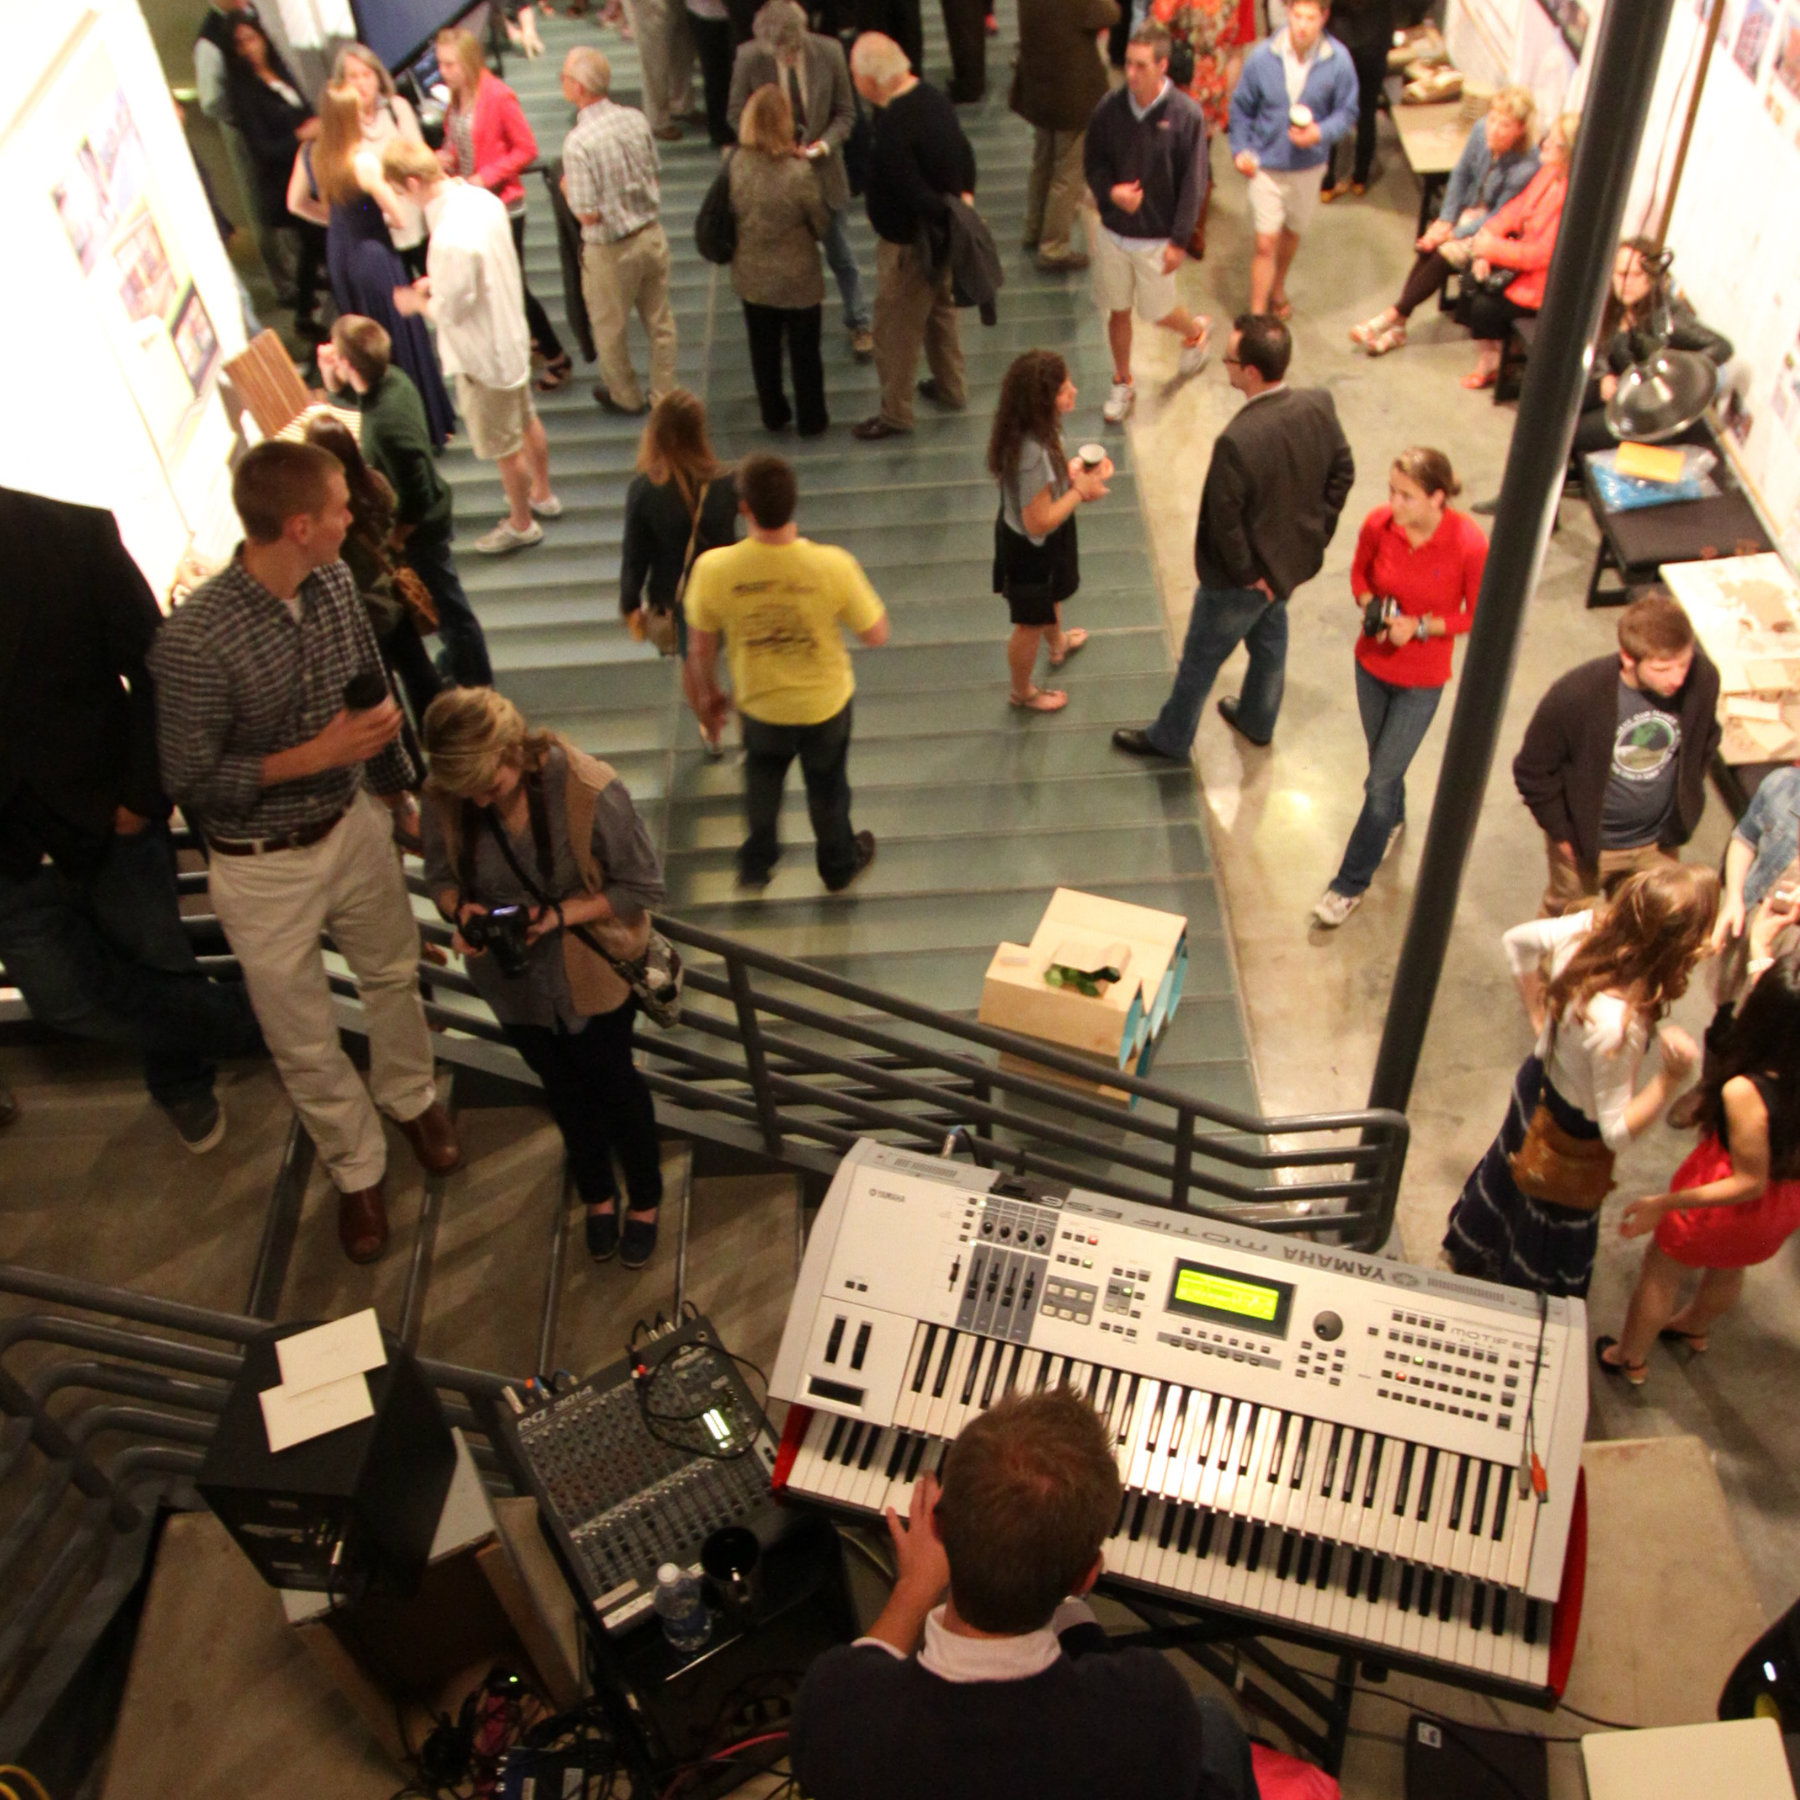 atrium full of people at open house with keyboard in the foreground